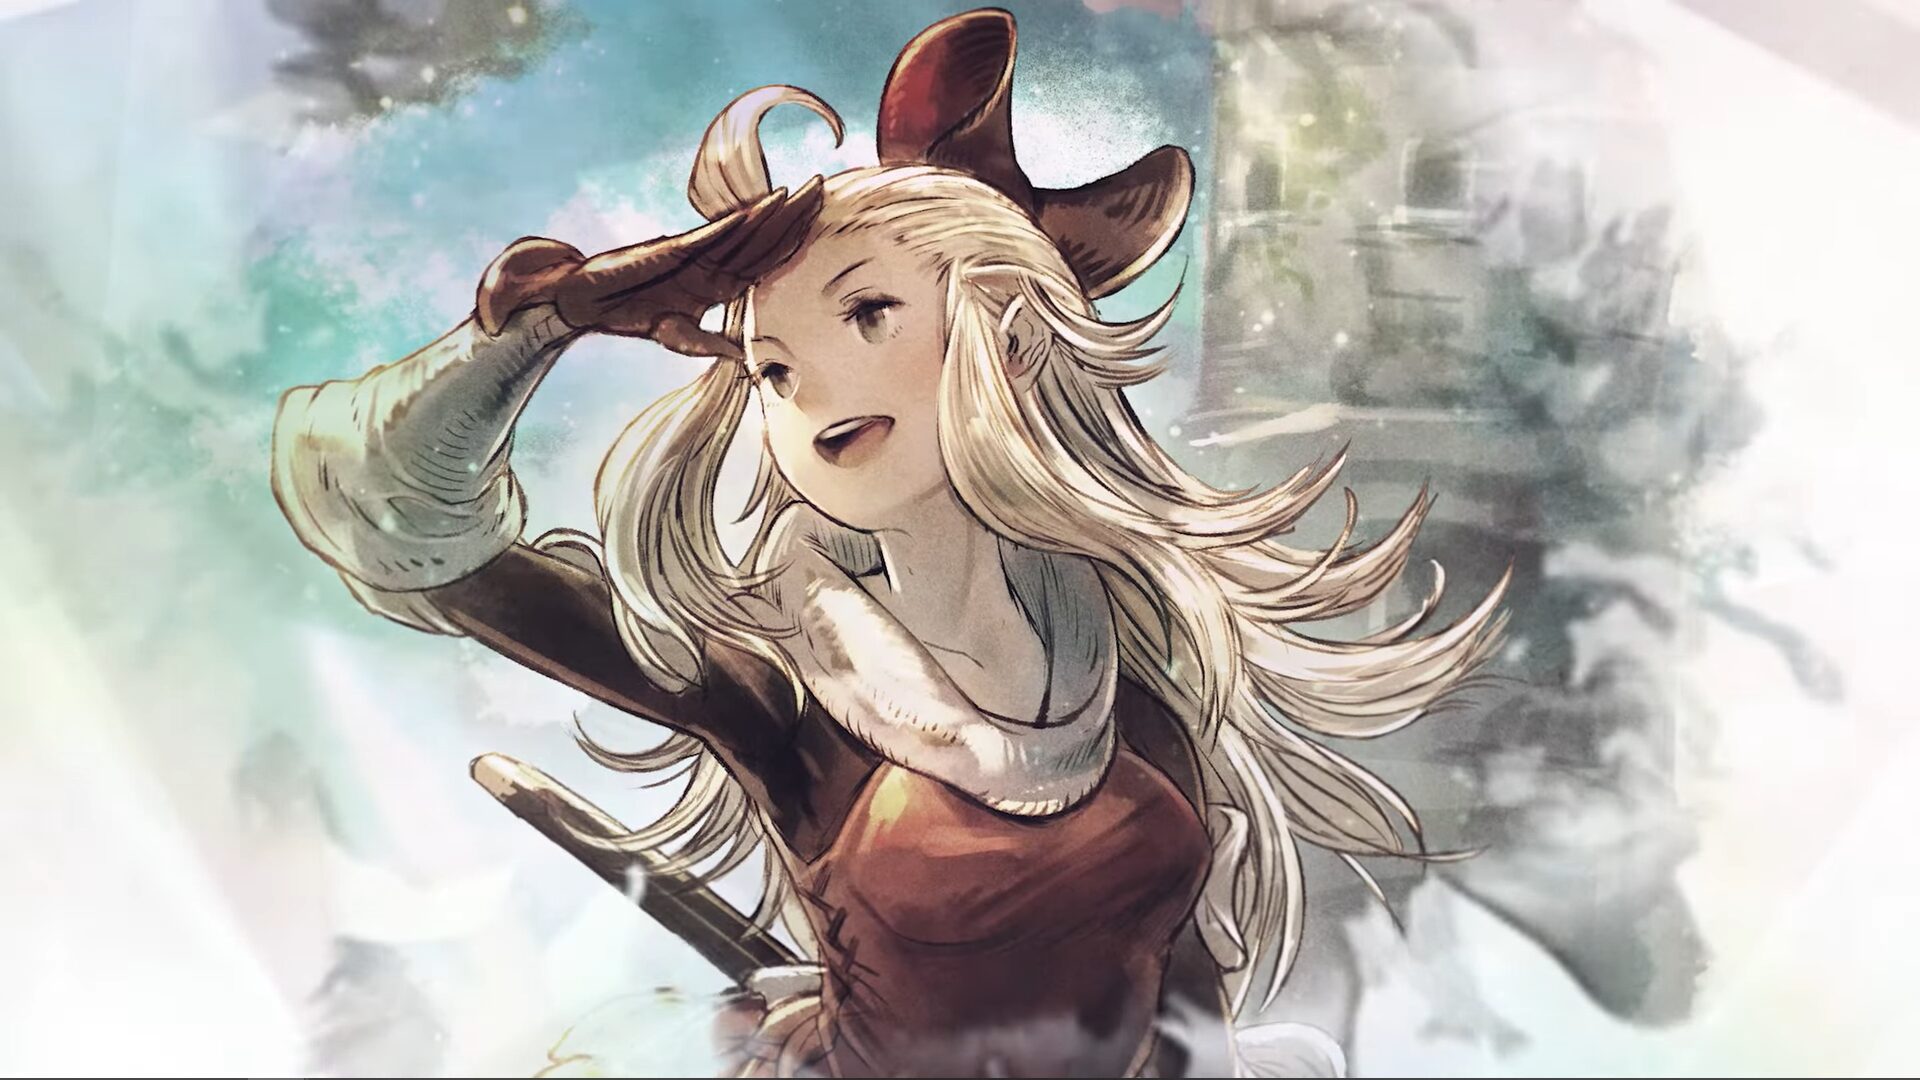 Octopath Traveler: Champions Of The Continent Bravely Default